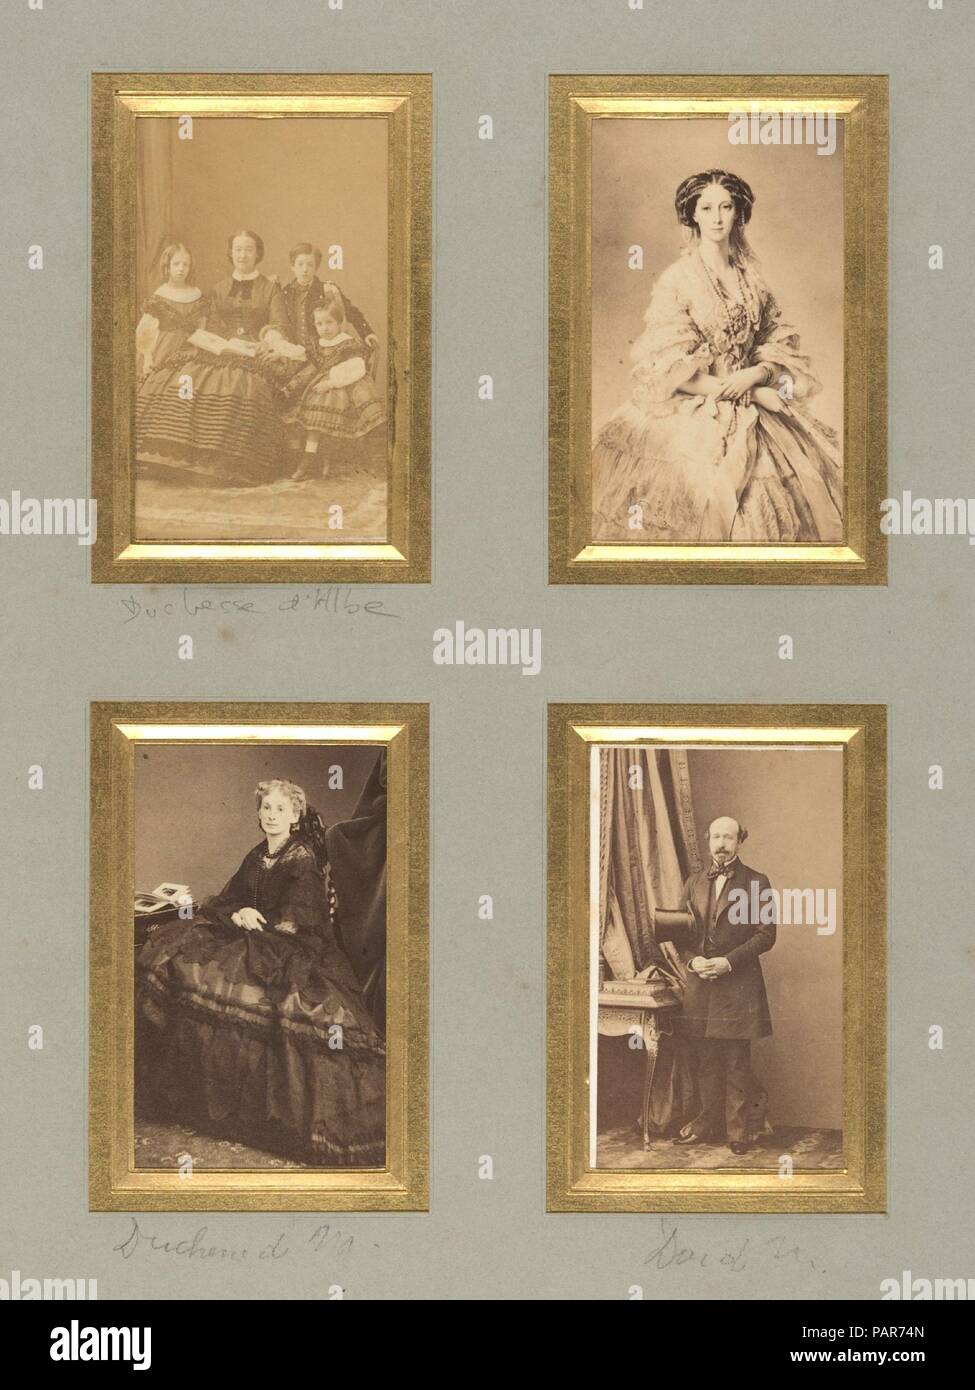 [Duchesse d'Albe, Unknown Sitter, Duchesse de Morny, and Duc de Morny]. Artist: Pierre-Louis Pierson (French, 1822-1913) , et al; Painted and retouched by Marck. Dimensions: Image: 3 3/8 in. × 2 in. (8.6 × 5.1 cm) (each). Person in Photograph: Person in photograph Sophie Troubetzkoi, duchesse de Morny (Russian, Moscow 1838-1896); Person in photograph Charles-Auguste-Louis-Joseph de Morny, duc de Morny (French (born Switzerland) 1811-1865 Paris). Date: before 1865. Museum: Metropolitan Museum of Art, New York, USA. Stock Photo